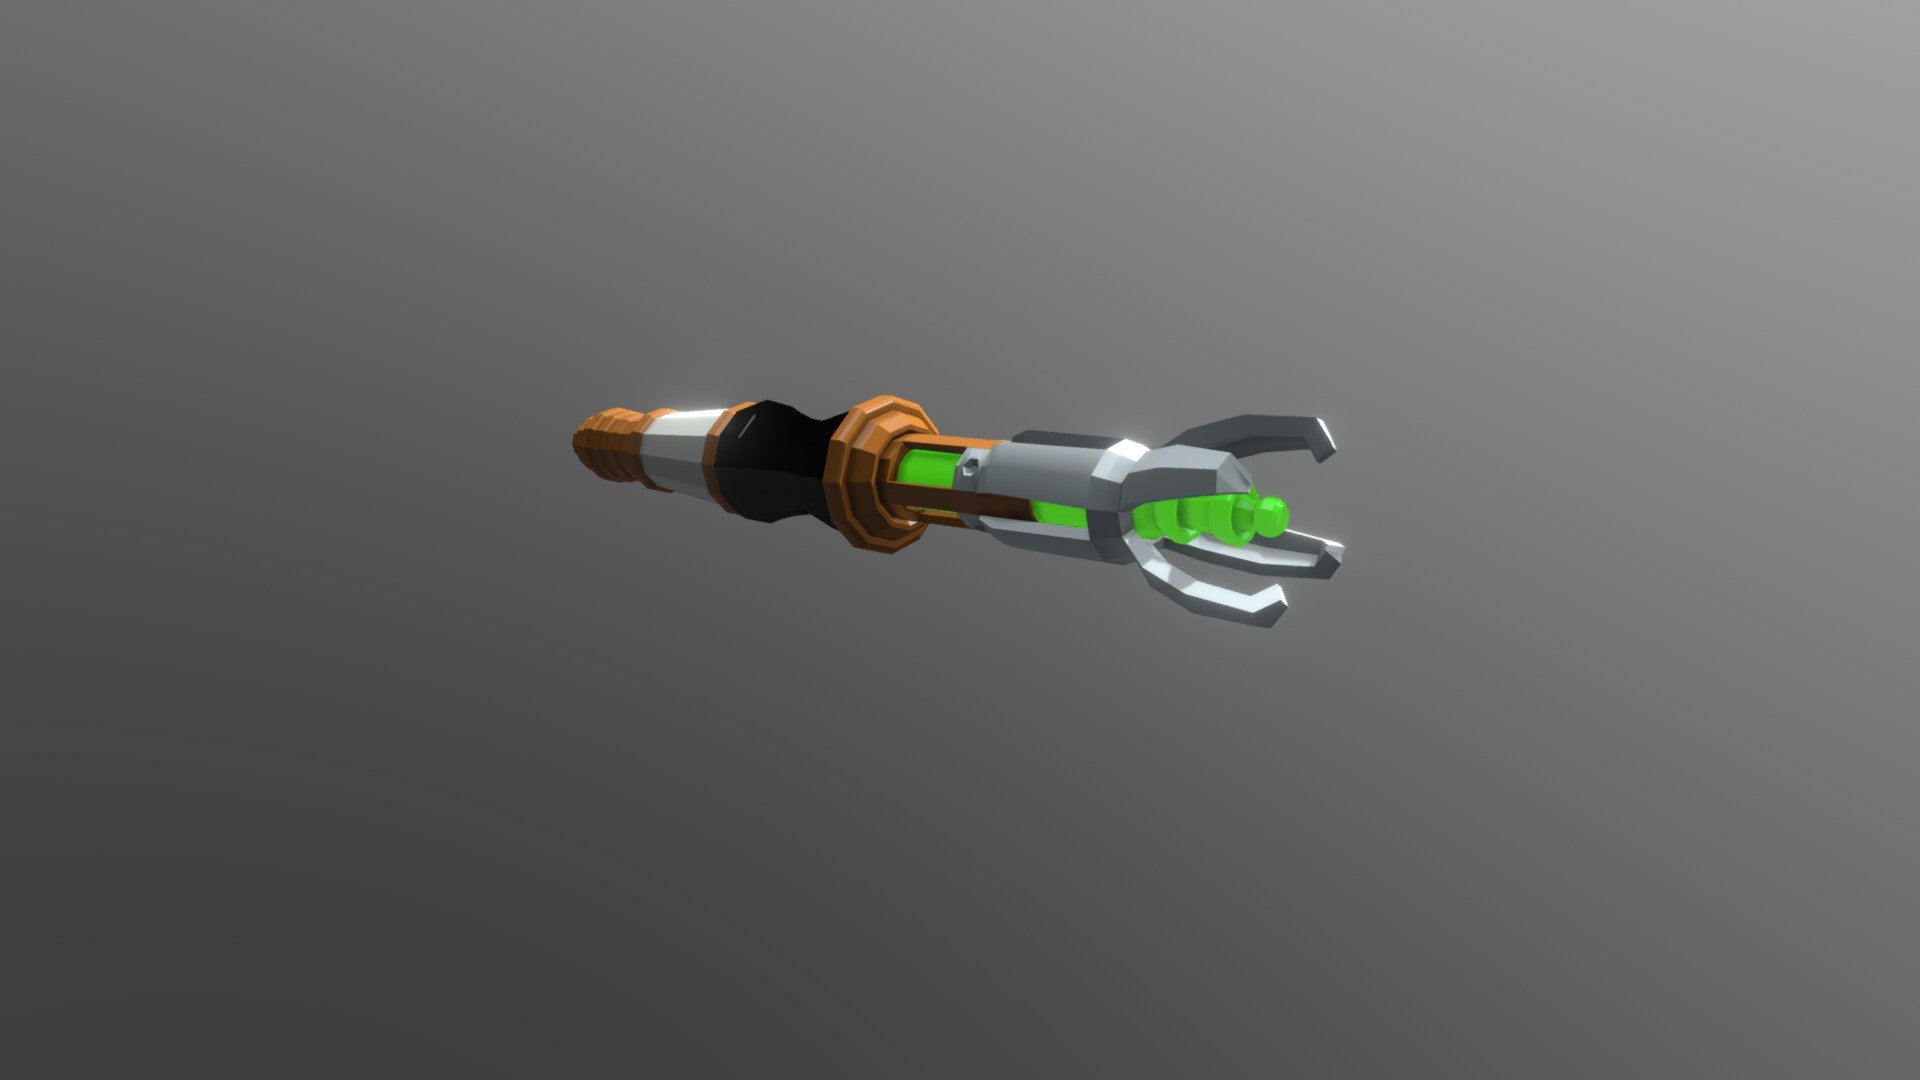 Doctor Who - Sonic Screwdriver